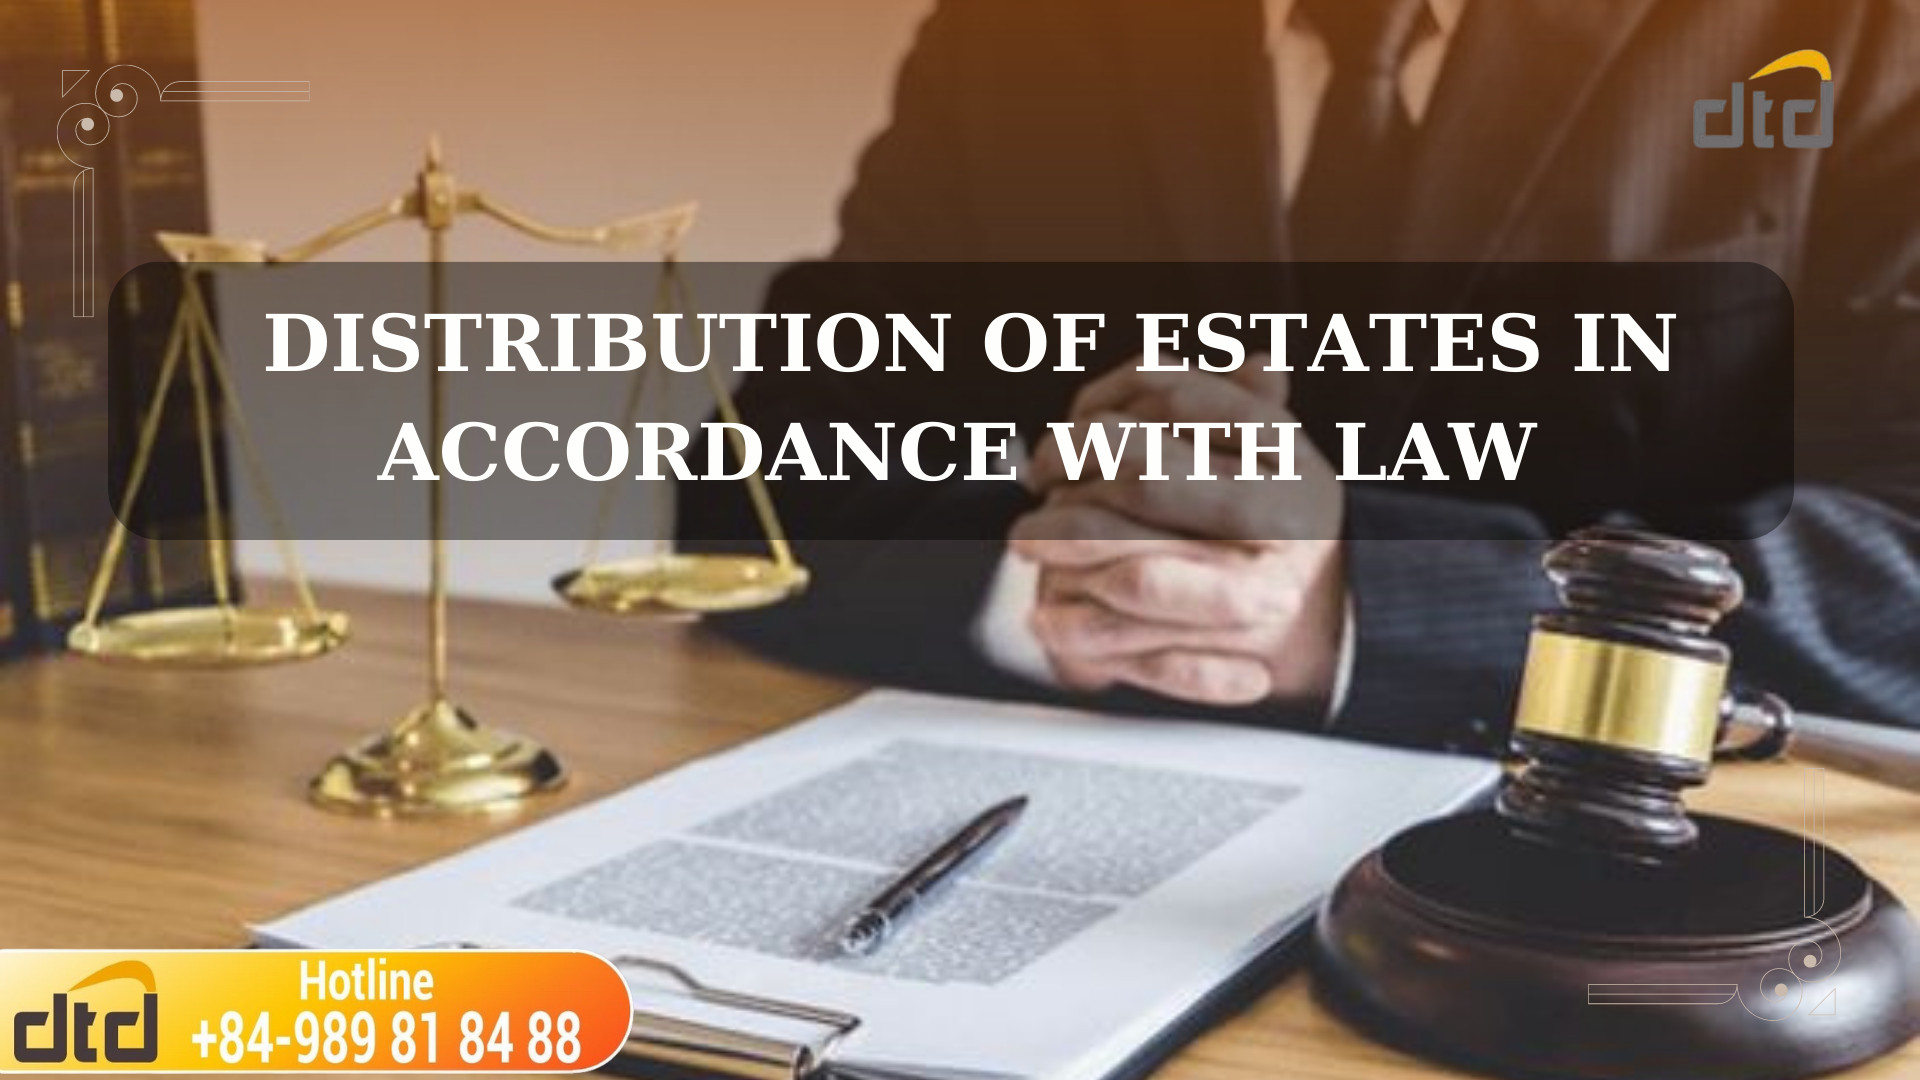 DISTRIBUTION OF ESTATES IN ACCORDANCE WITH LAW